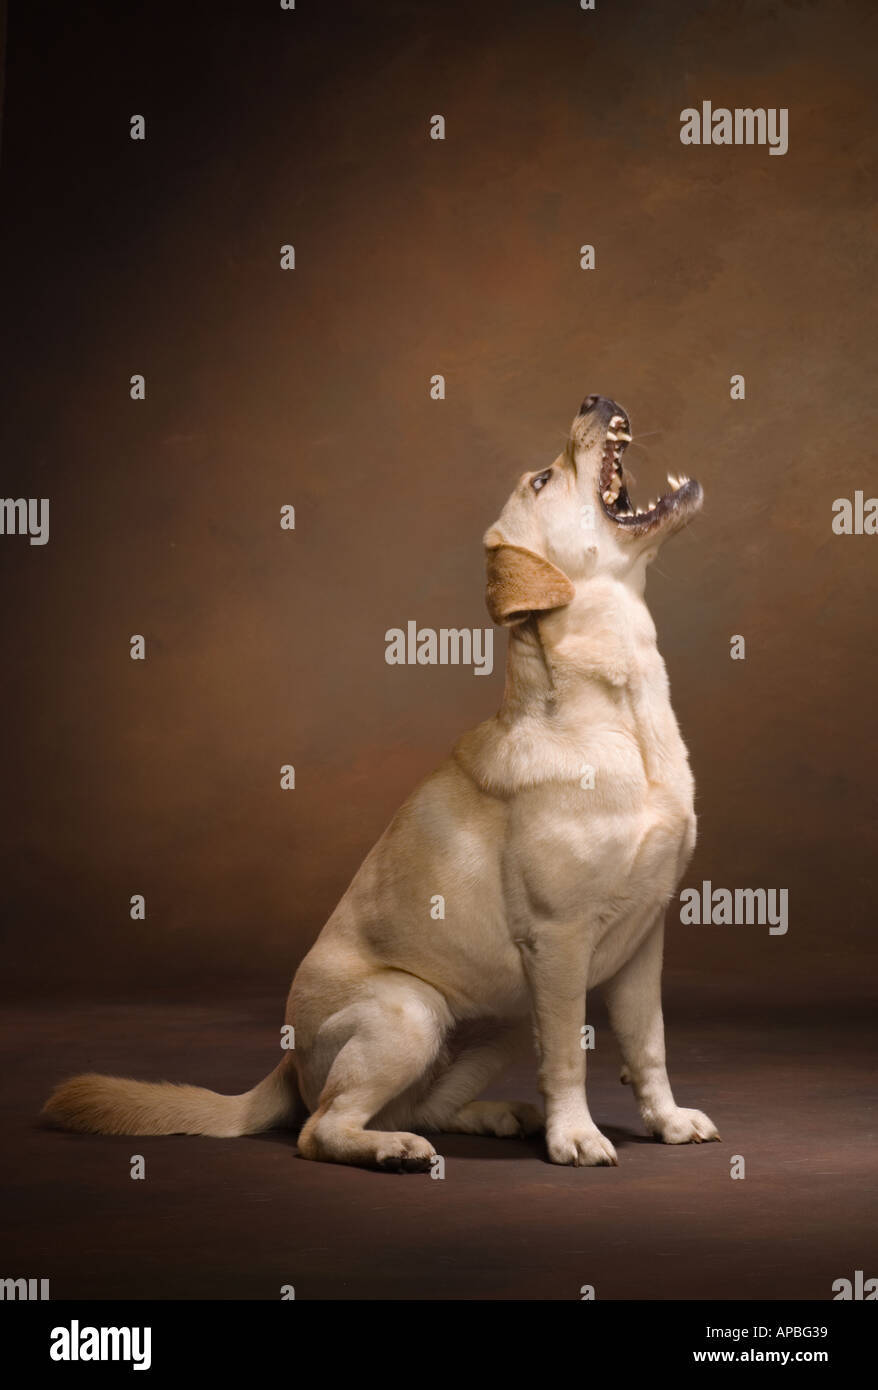 yellow labrador retriever dog in profile snapping at the air with his teeth  on a brown studio background Stock Photo - Alamy